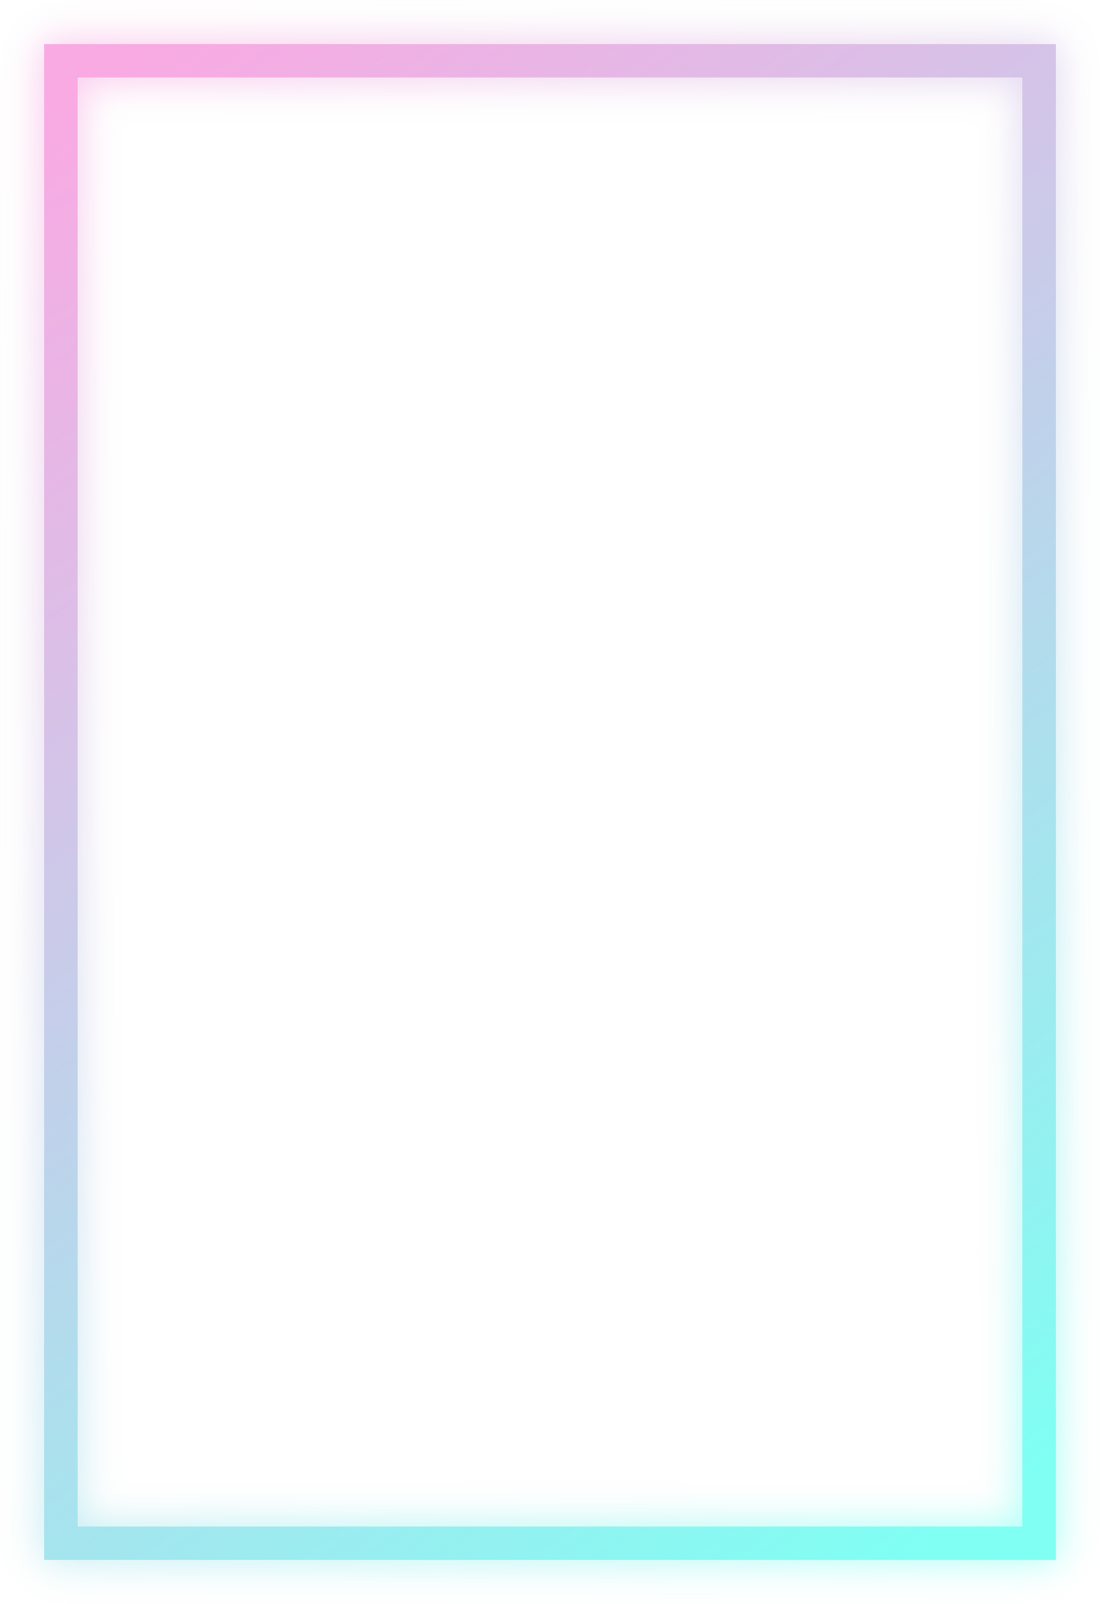 neon frame in pink and blue color .vector